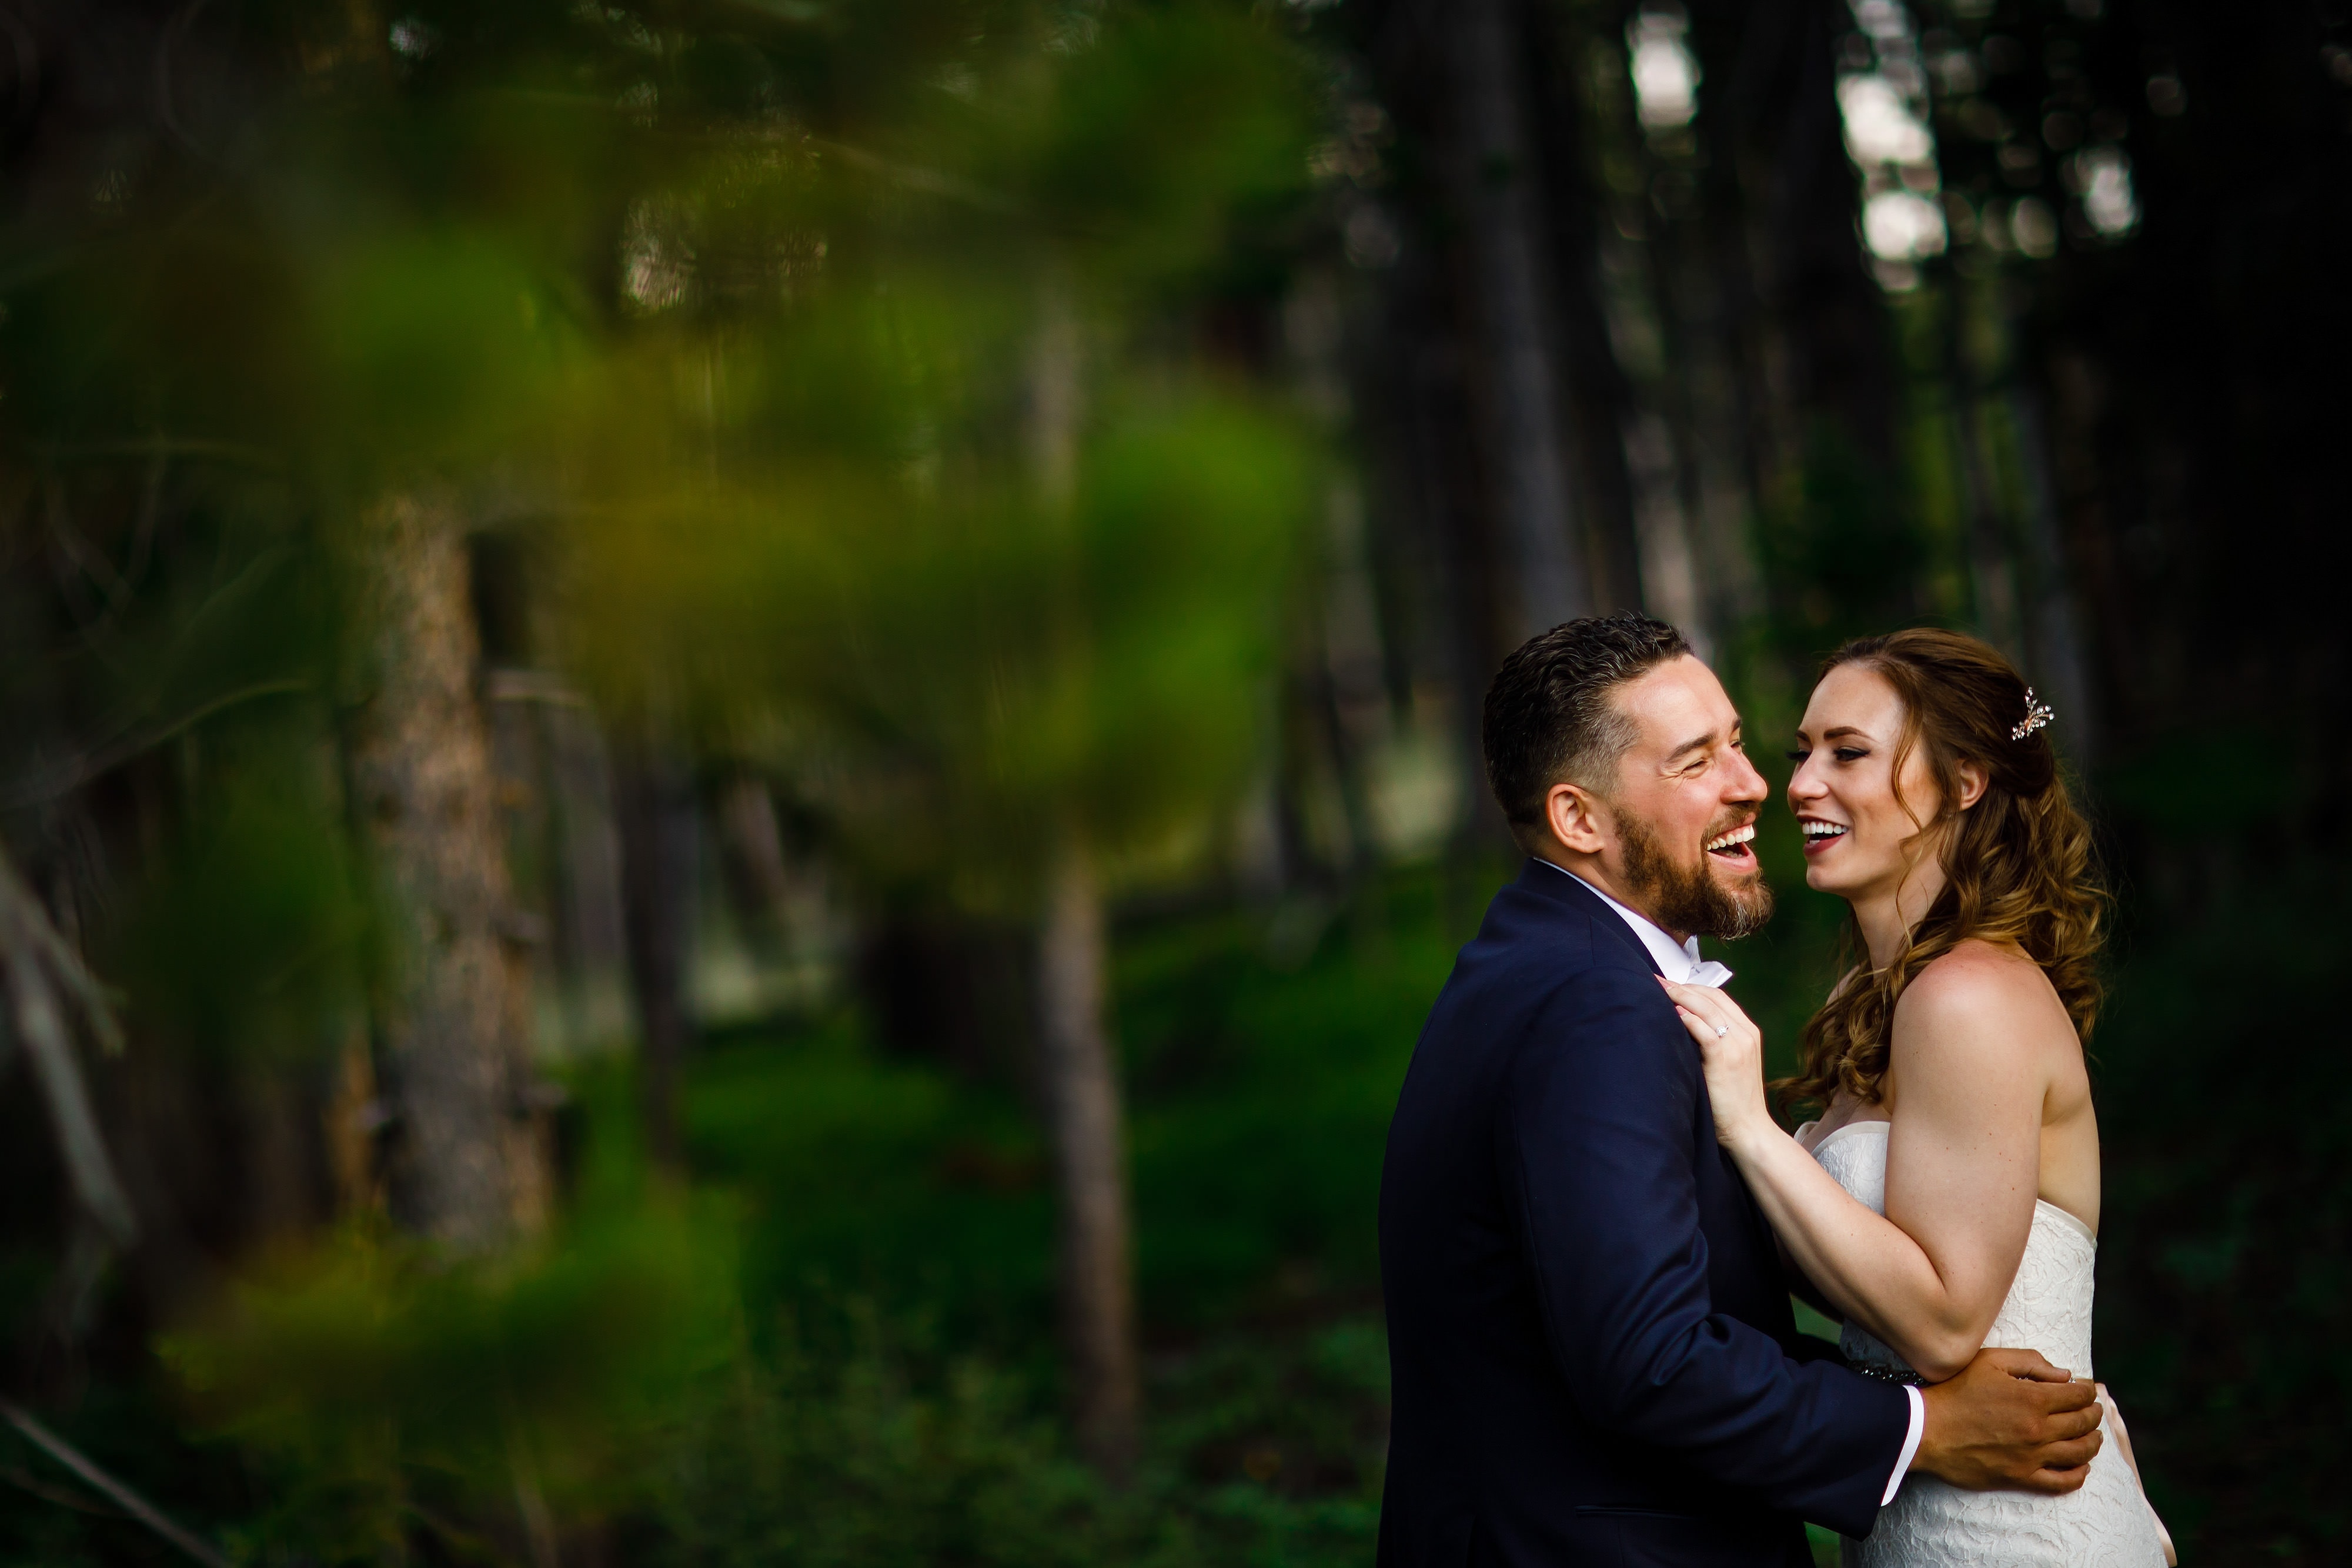 The couple share a laugh on Peak 9 during their wedding